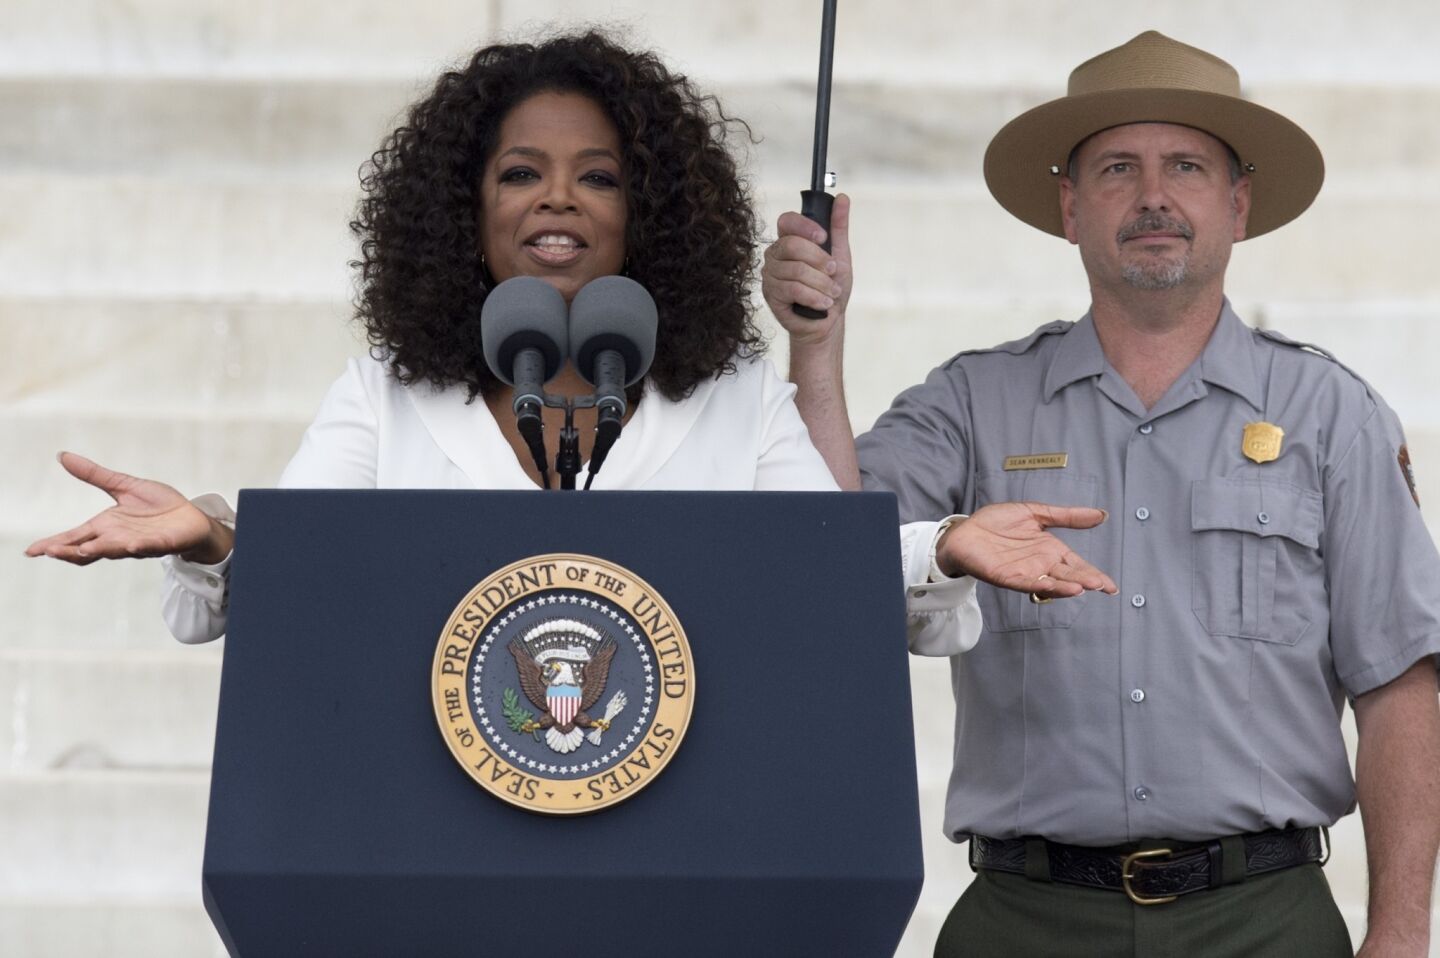 Oprah Winfrey speaks during the commemoration of the 50th anniversary of the March on Washington.